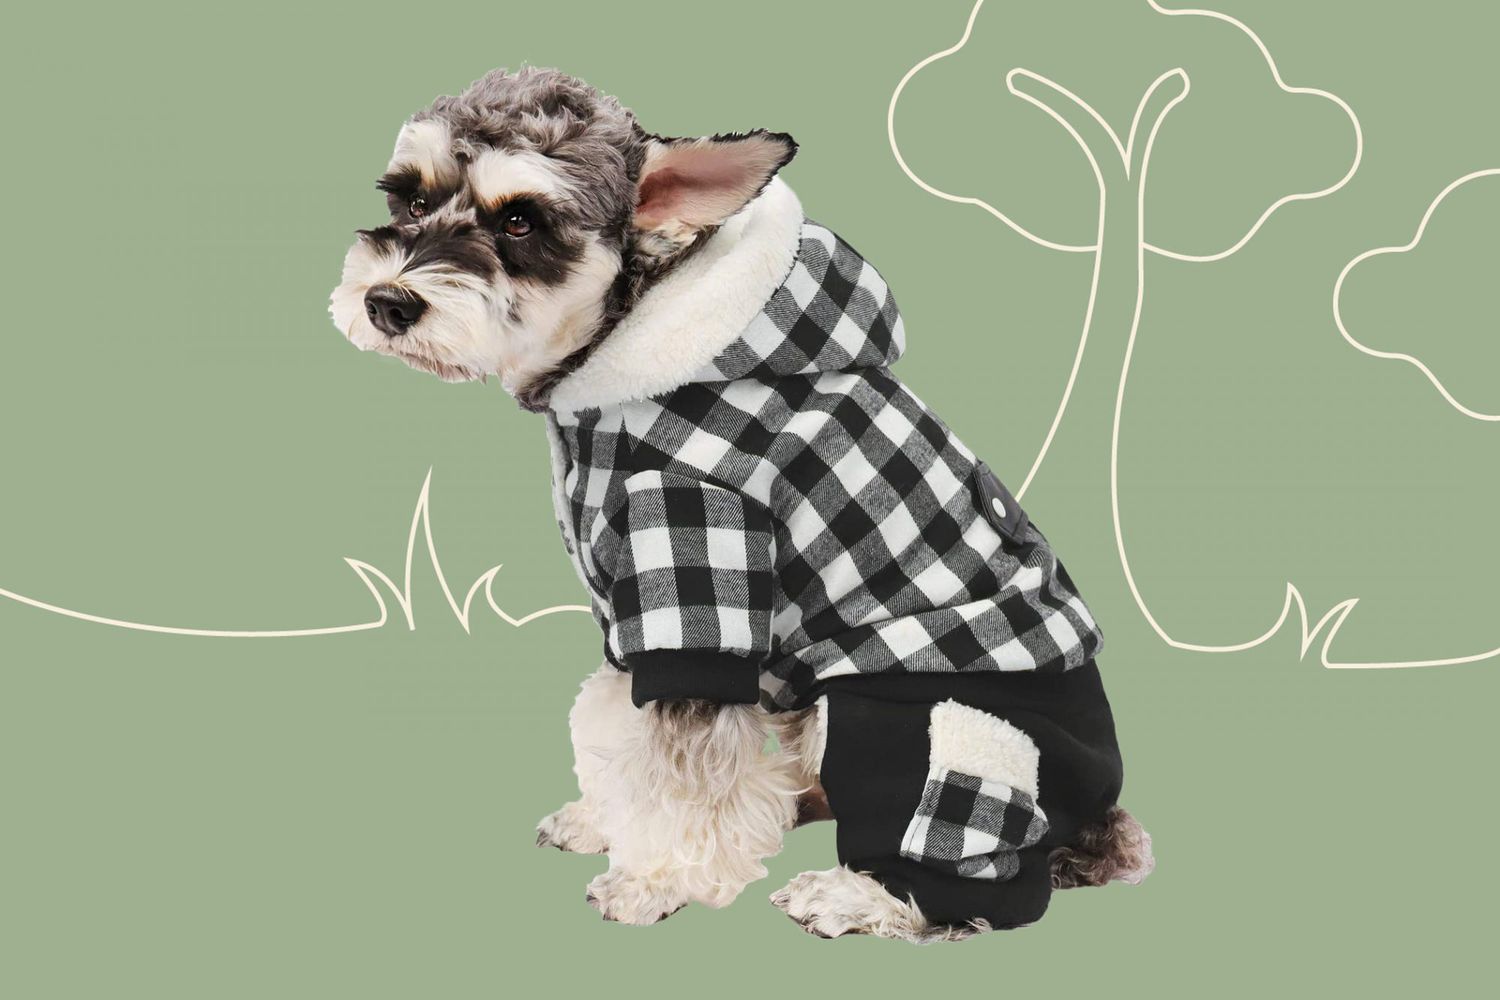 US Pet Rain Coat for Small Puppy Dogs Jacket Casual Waterproof Dog Coat Clothes